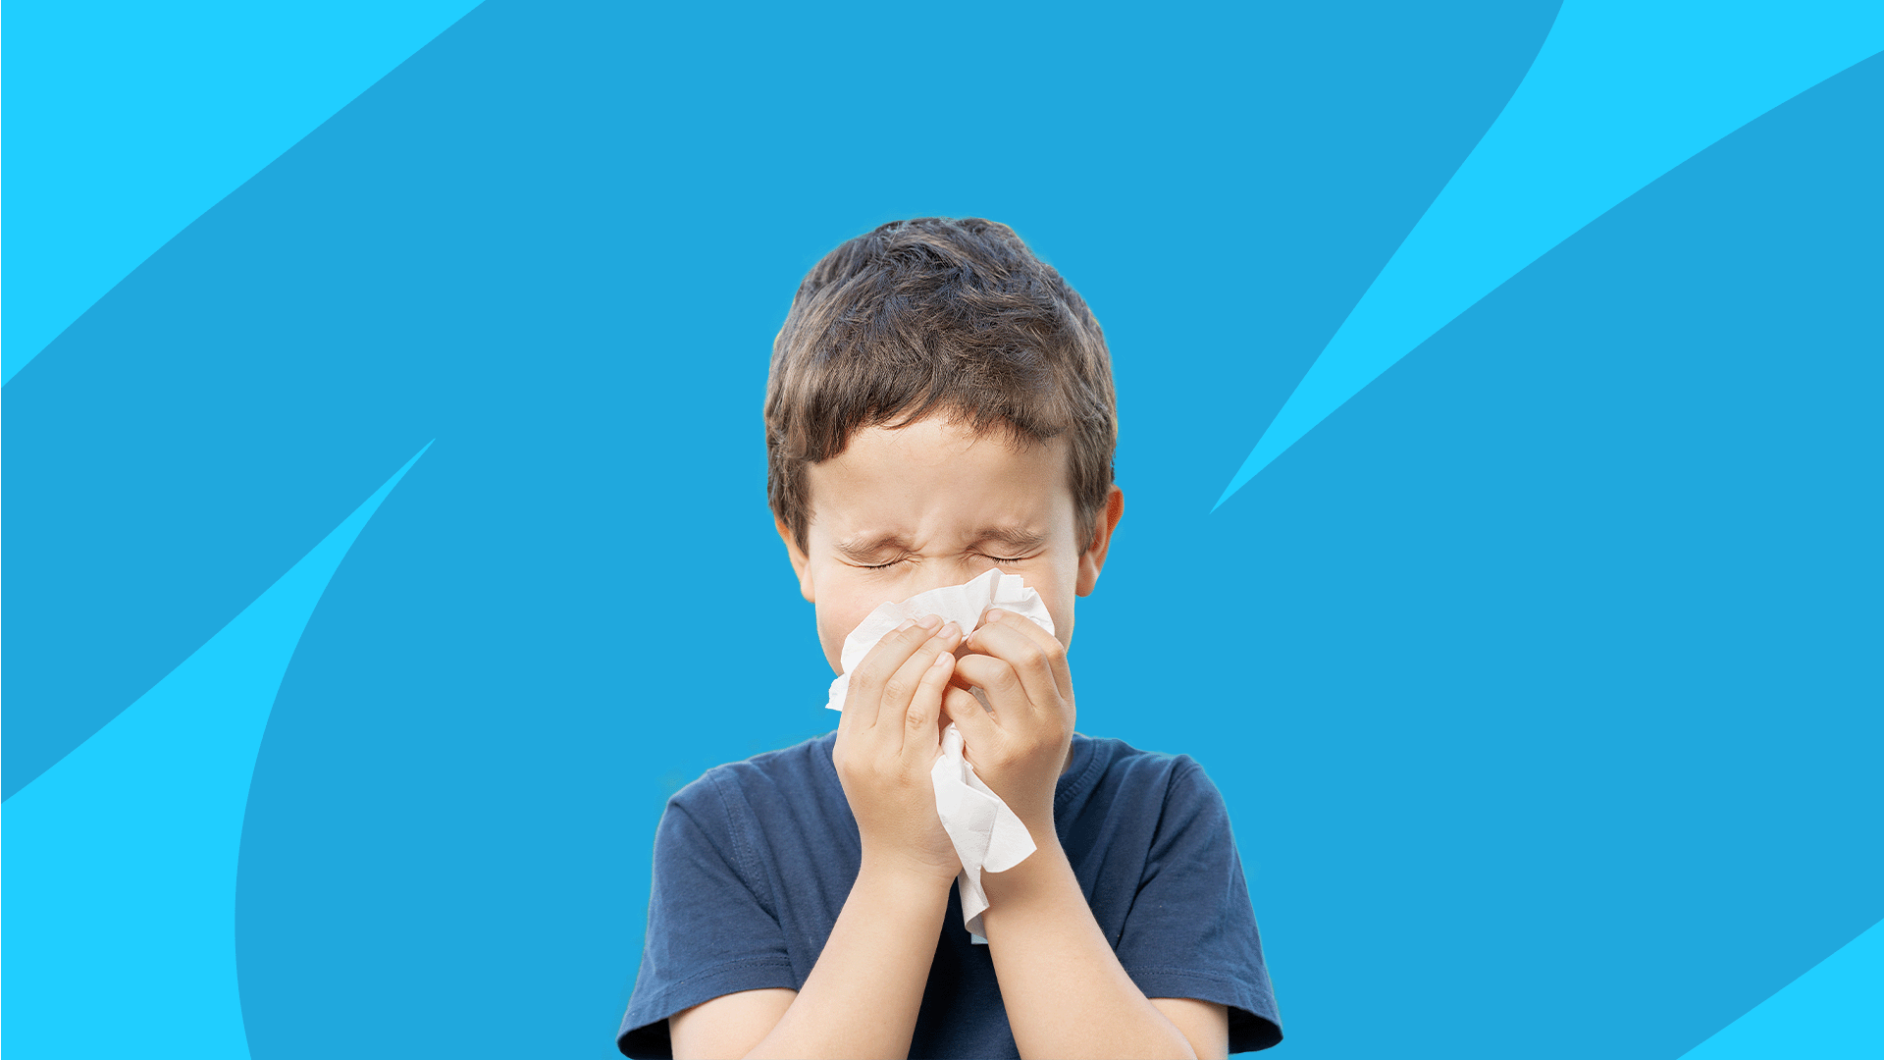 child blowing their nose - how to stop a runny nose